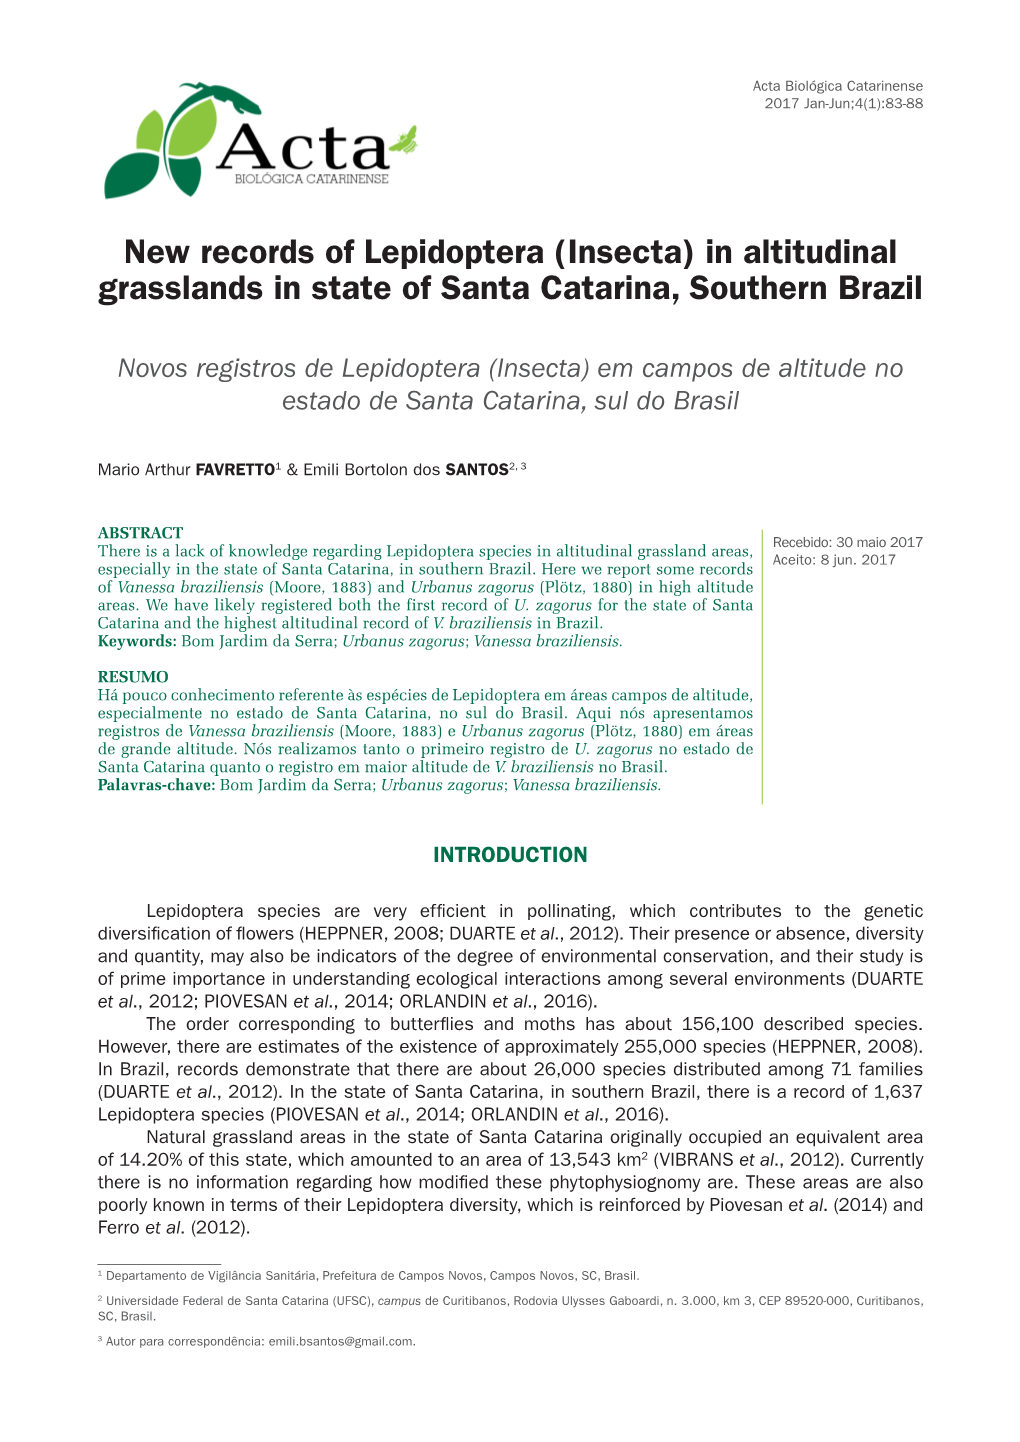 New Records of Lepidoptera (Insecta) in Altitudinal Grasslands in State of Santa Catarina, Southern Brazil